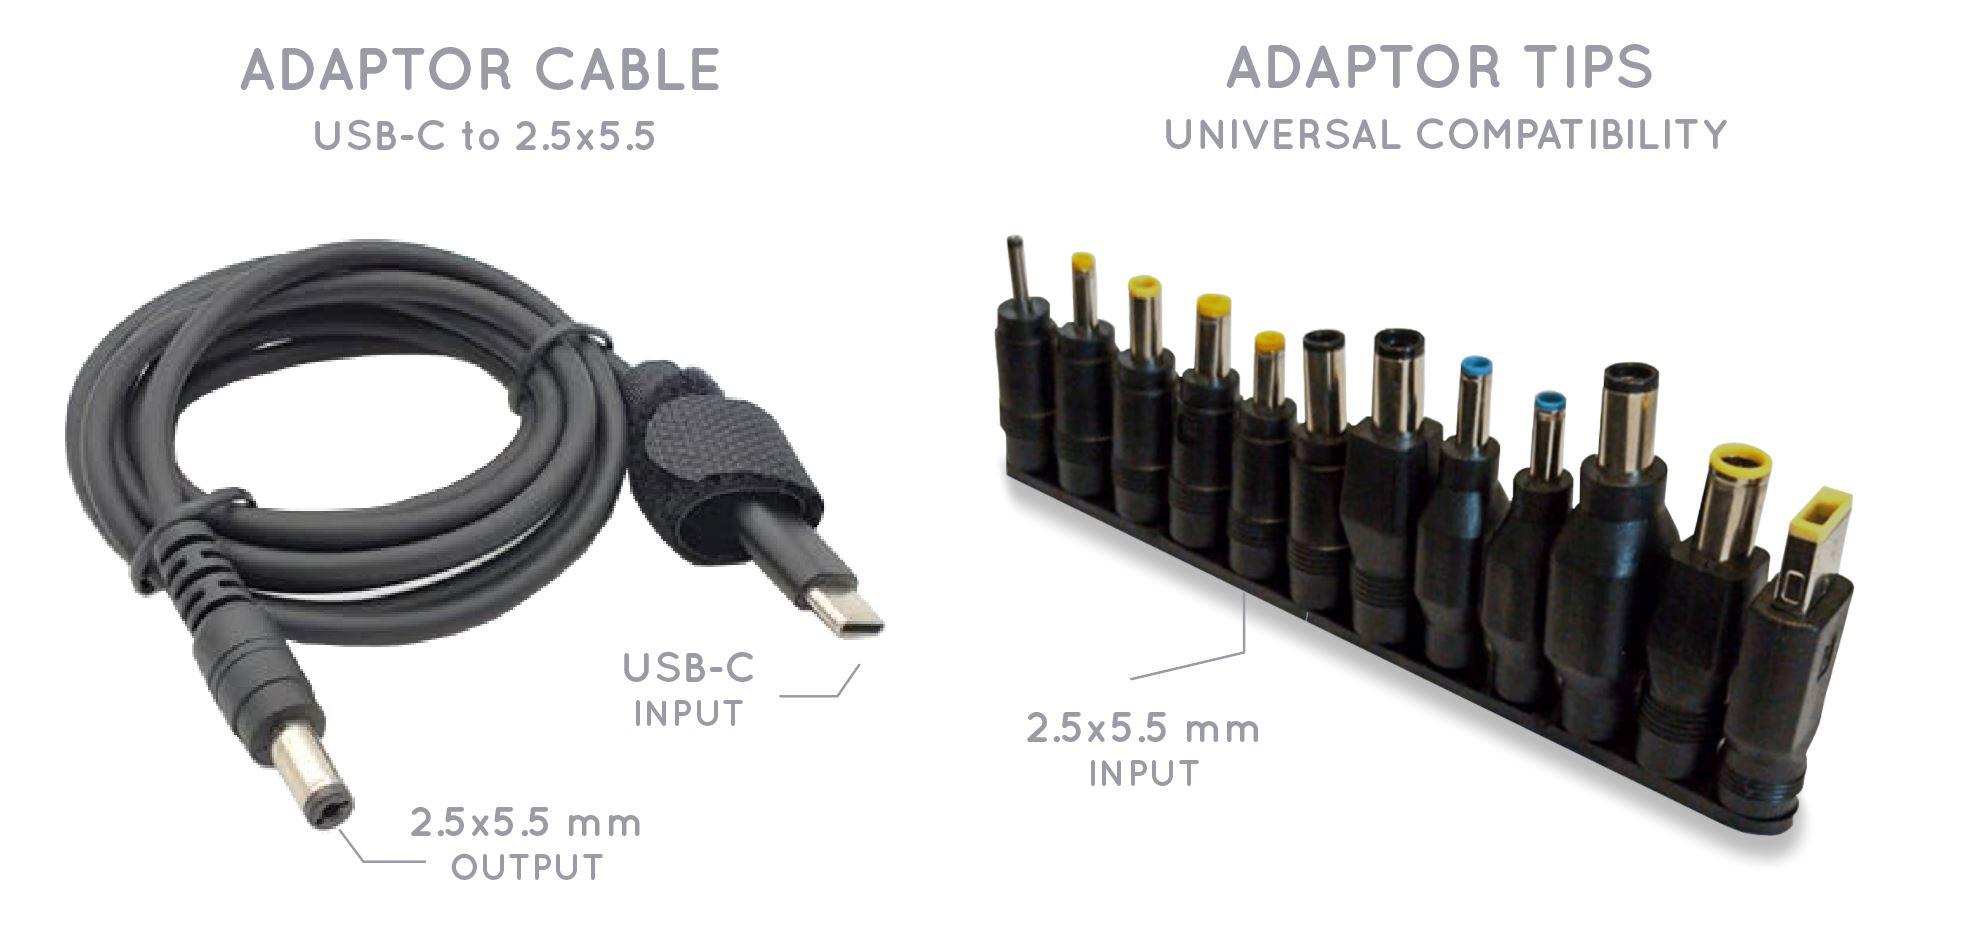 Adapters and Chargers｜Laptops Accessories｜ASUS Global